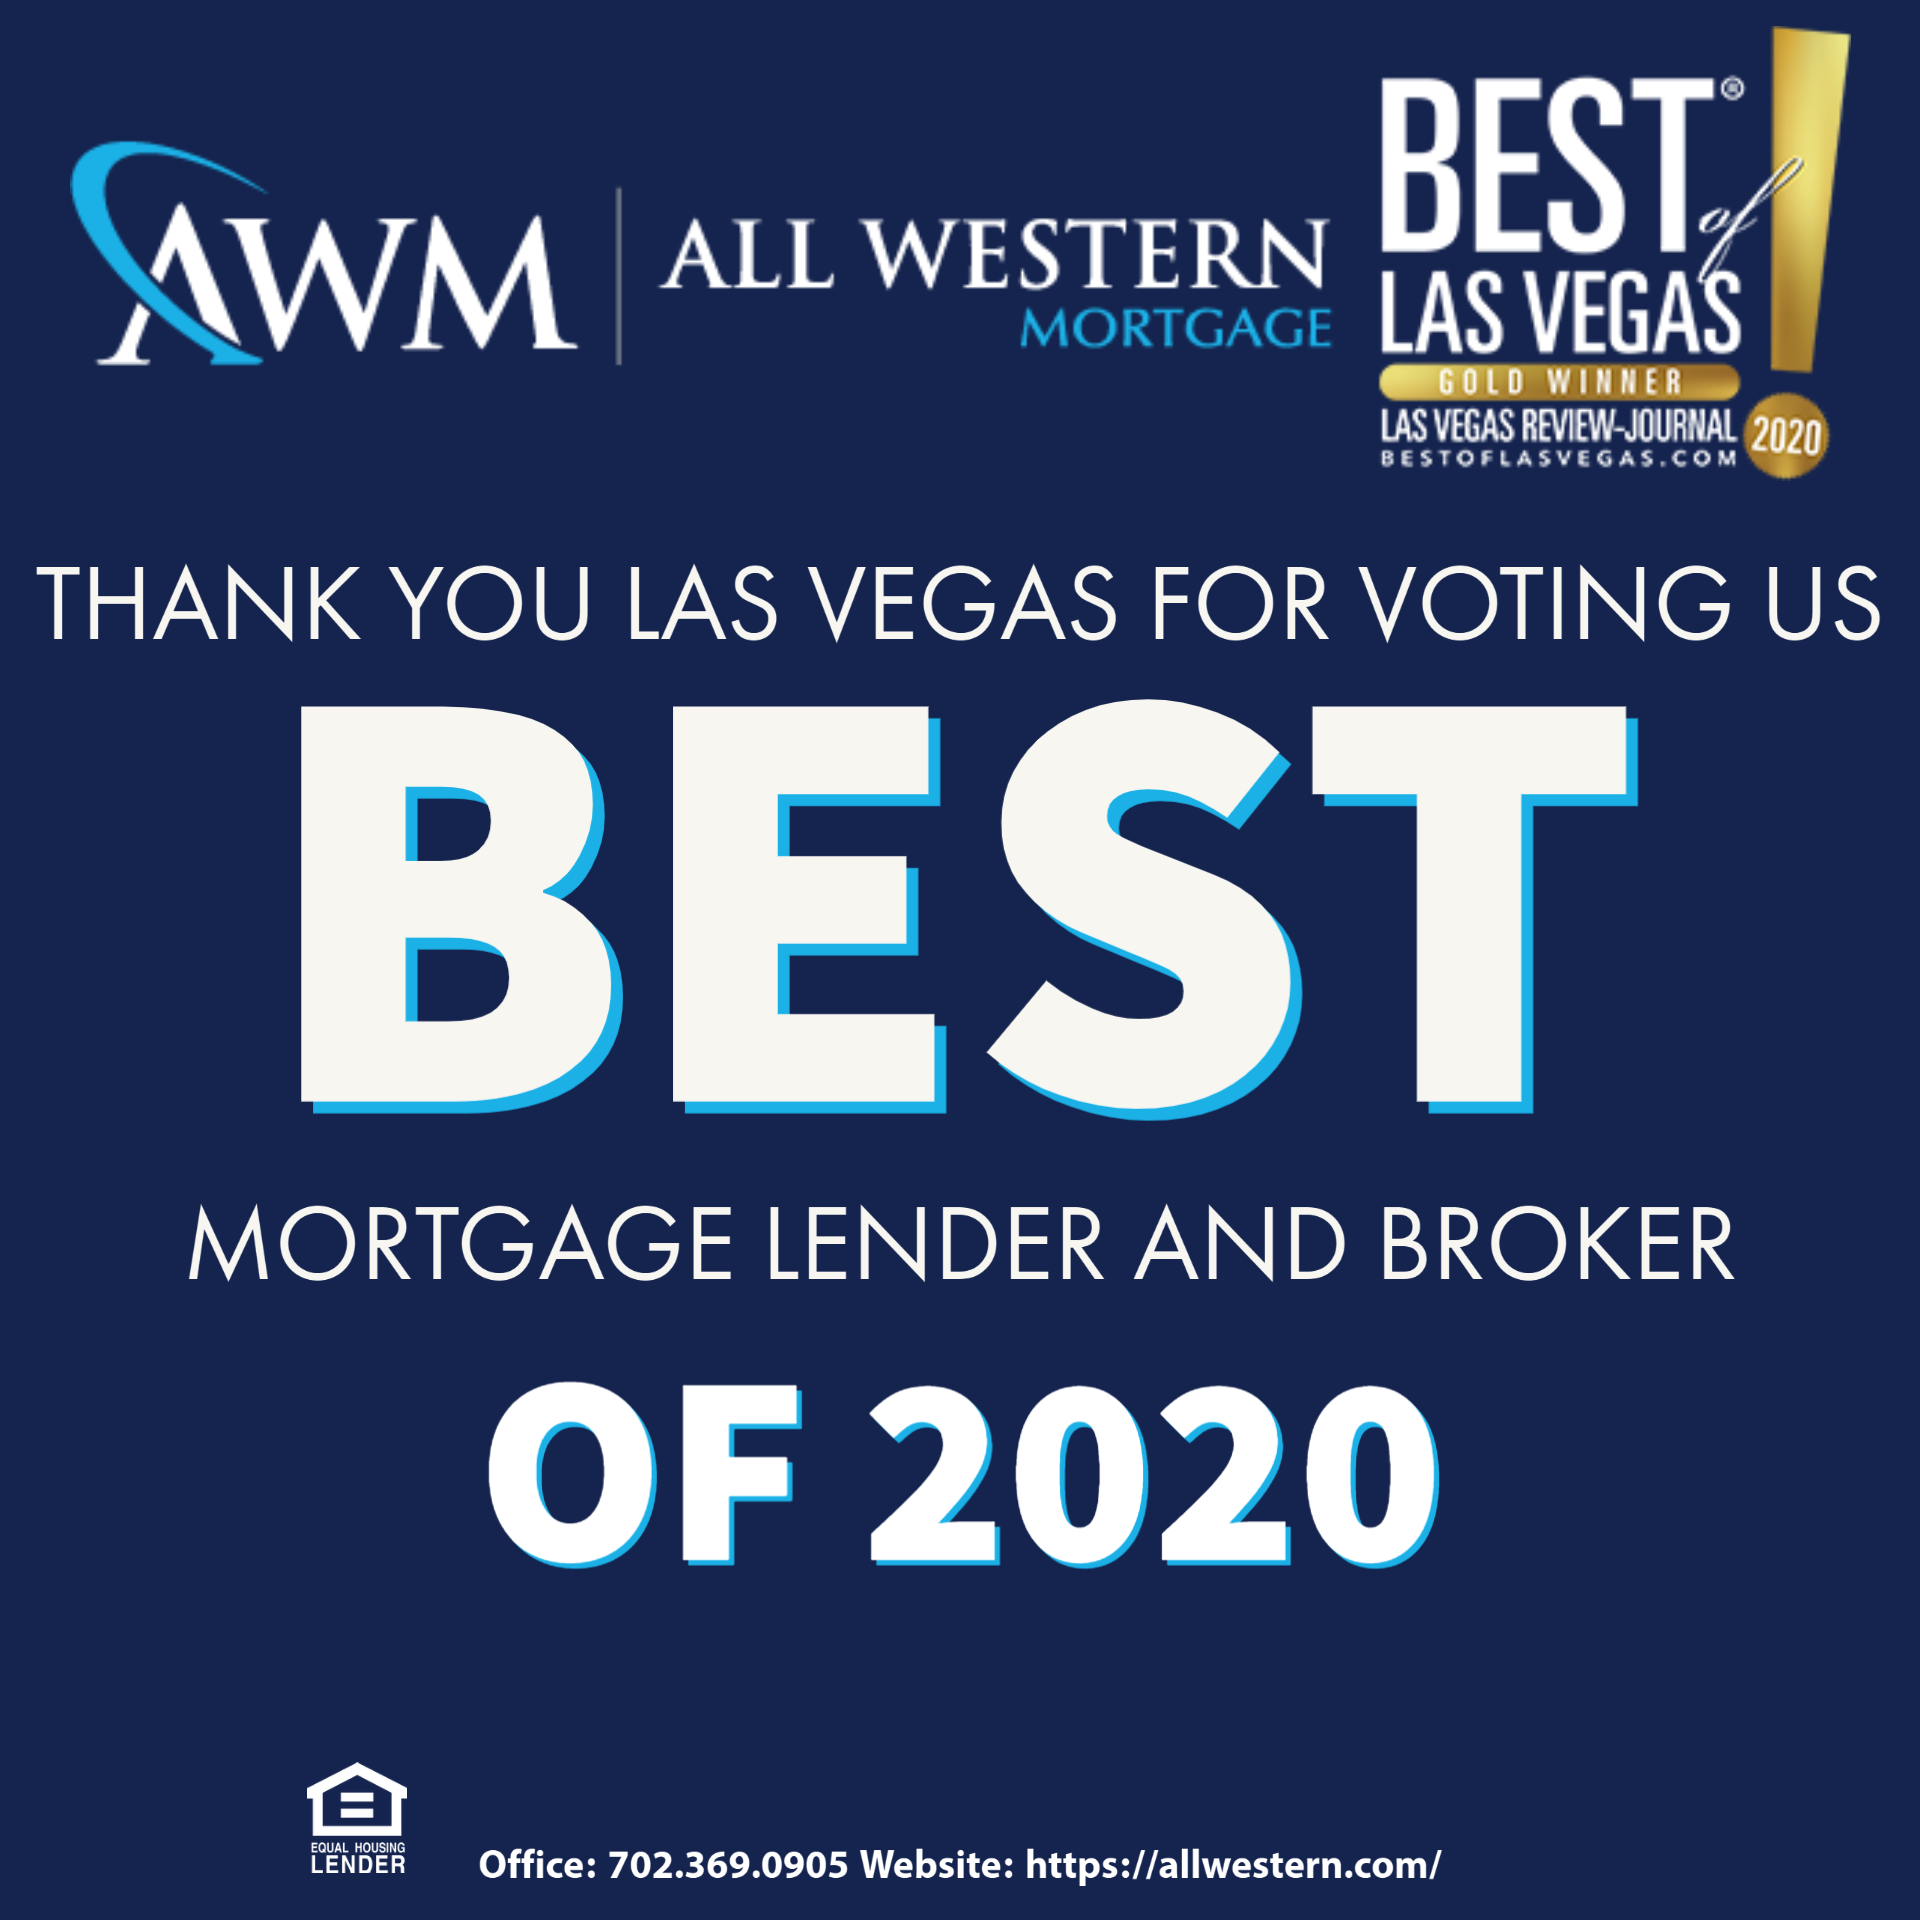 mortgage brokers in Las Vegas Archives - Drennen Home Loans